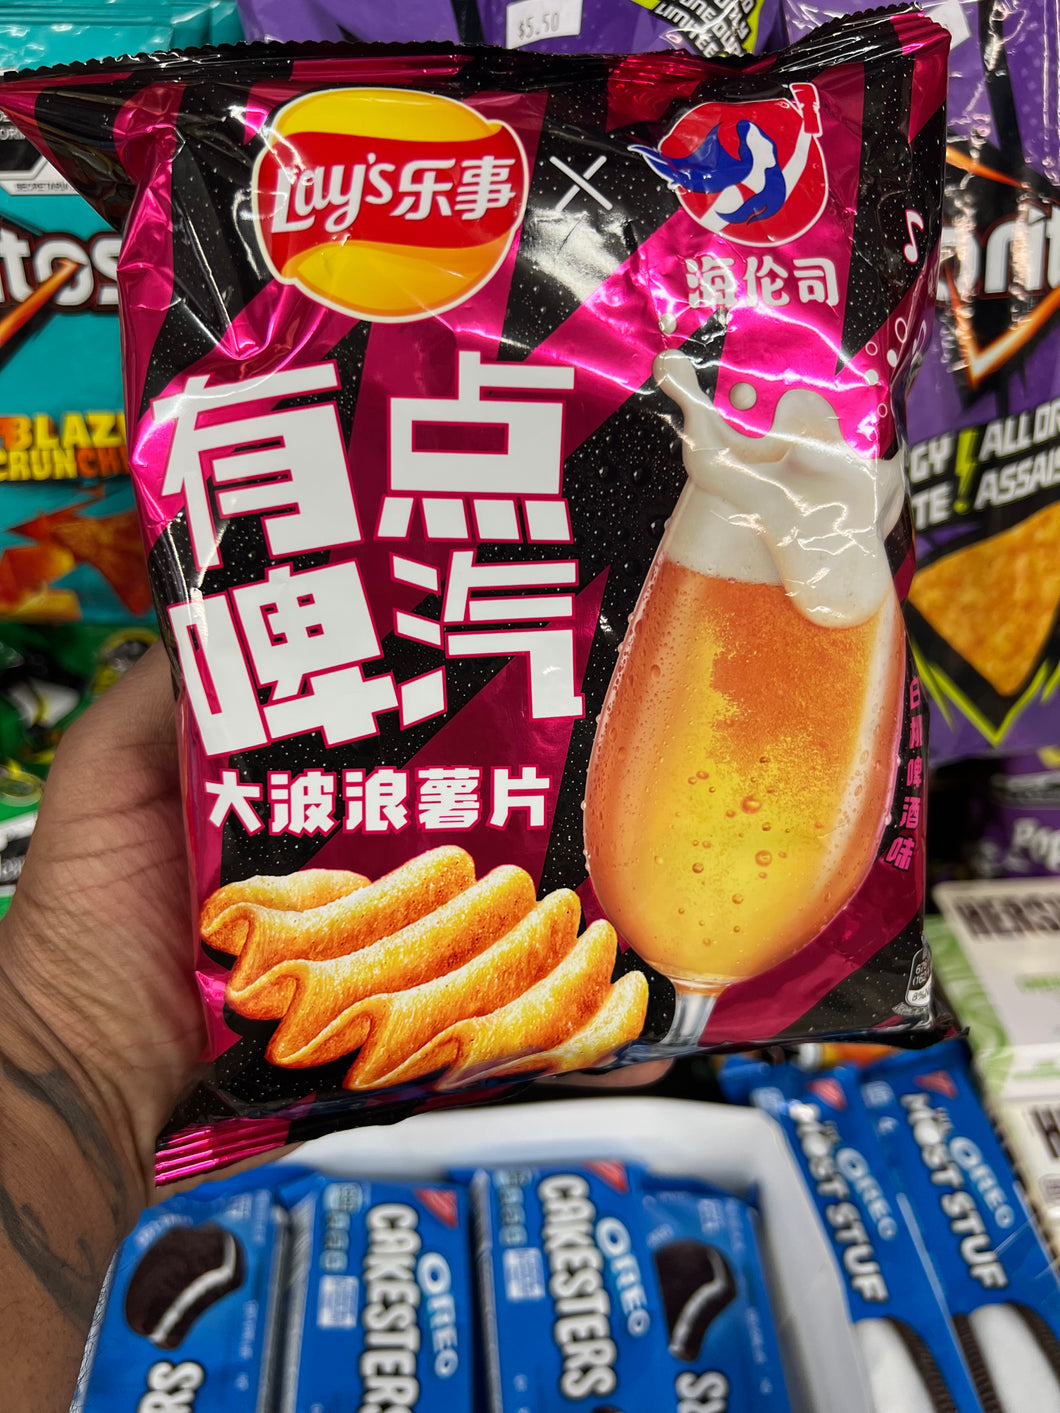 Lays Big Wave Chips Peach Beer Flavor (China)